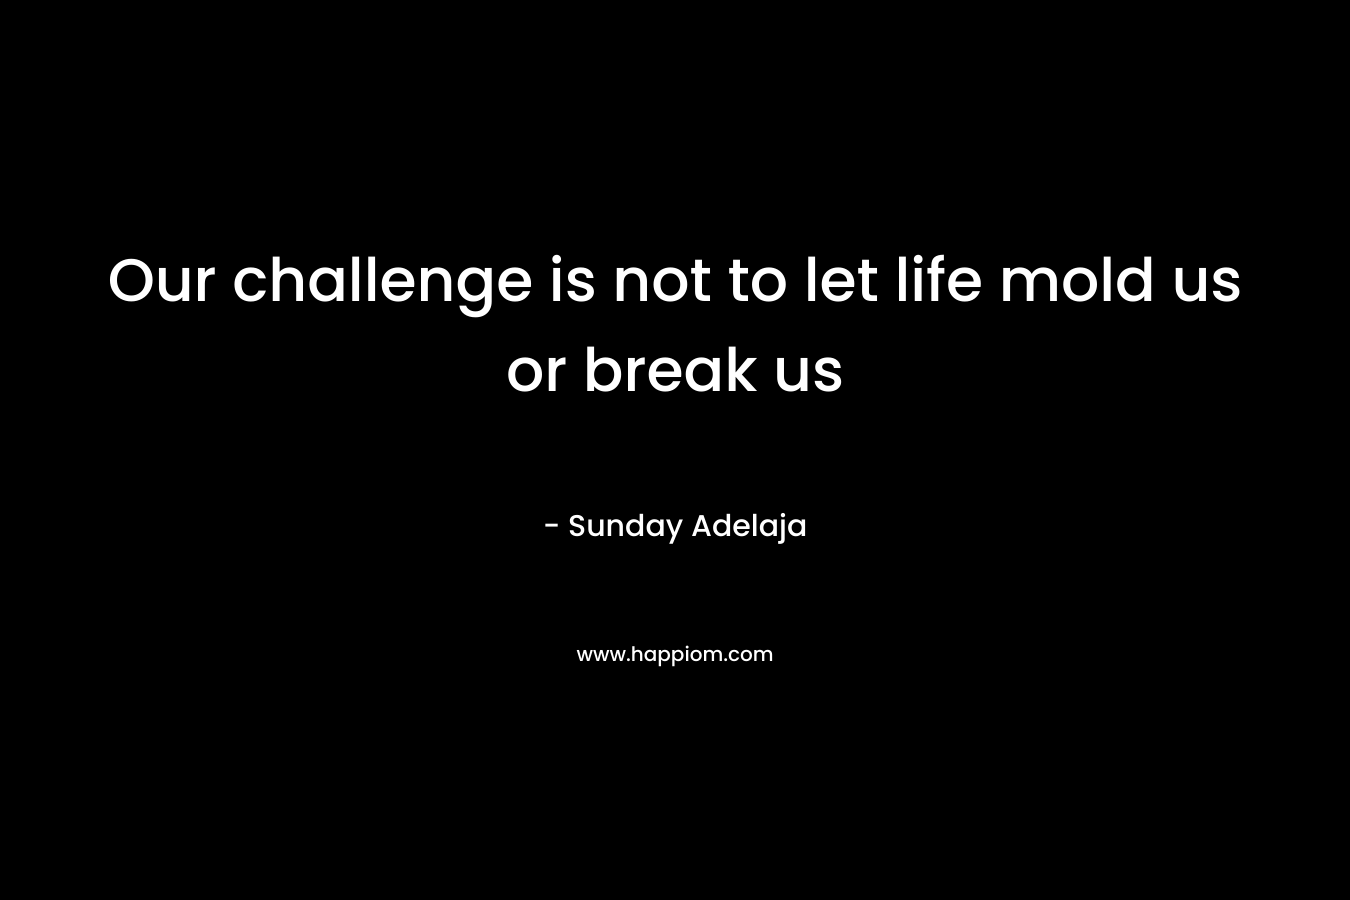 Our challenge is not to let life mold us or break us